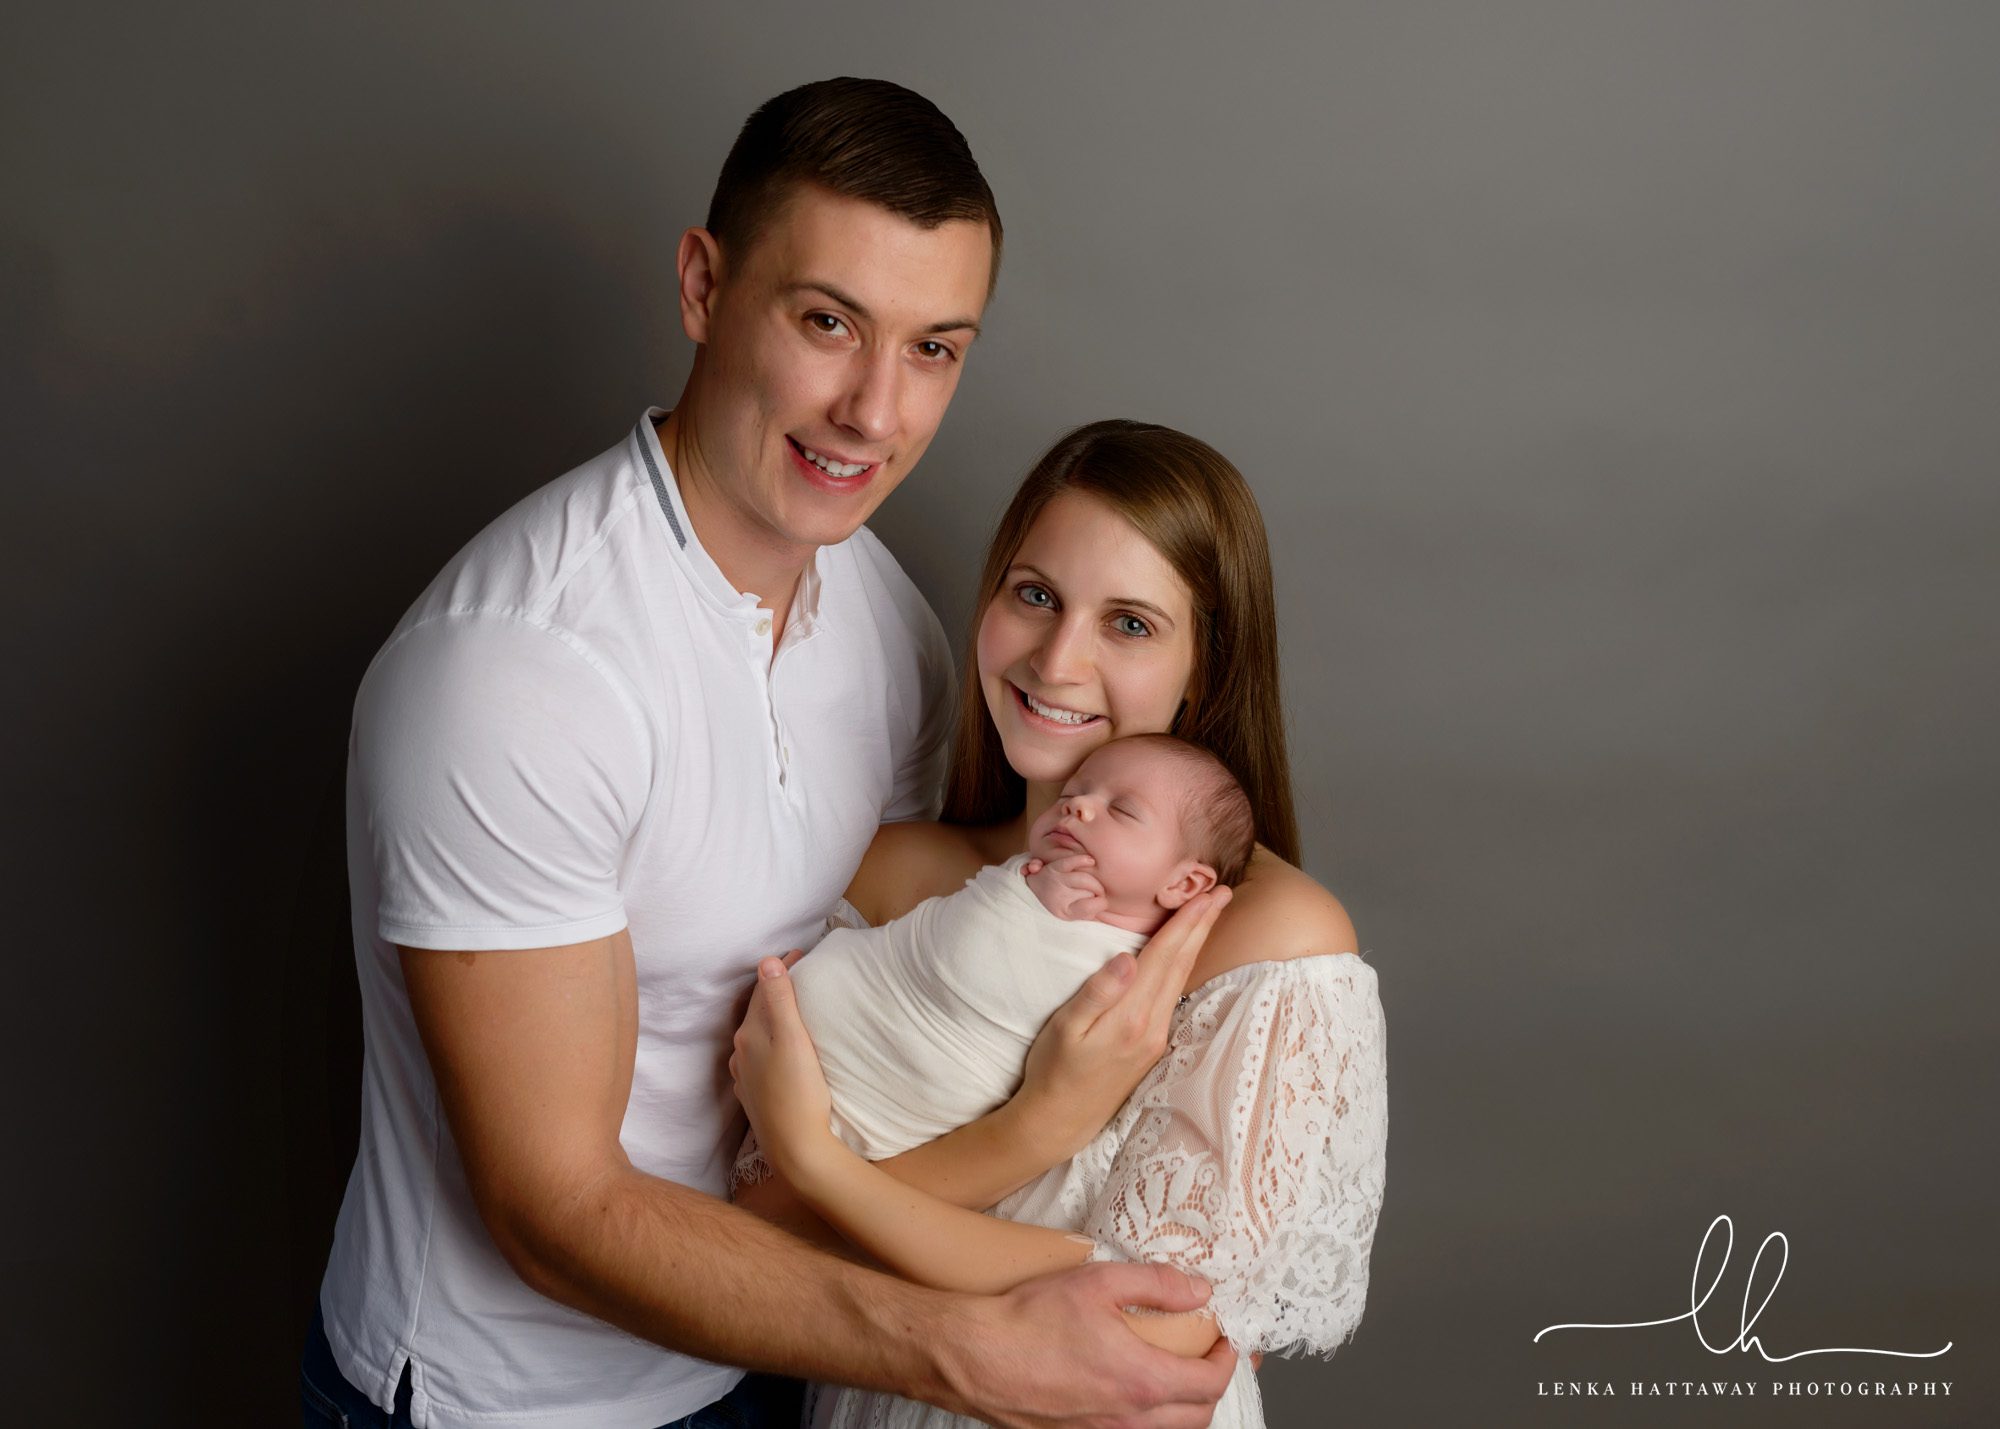 Baby with her parents during an in-home newborn session.